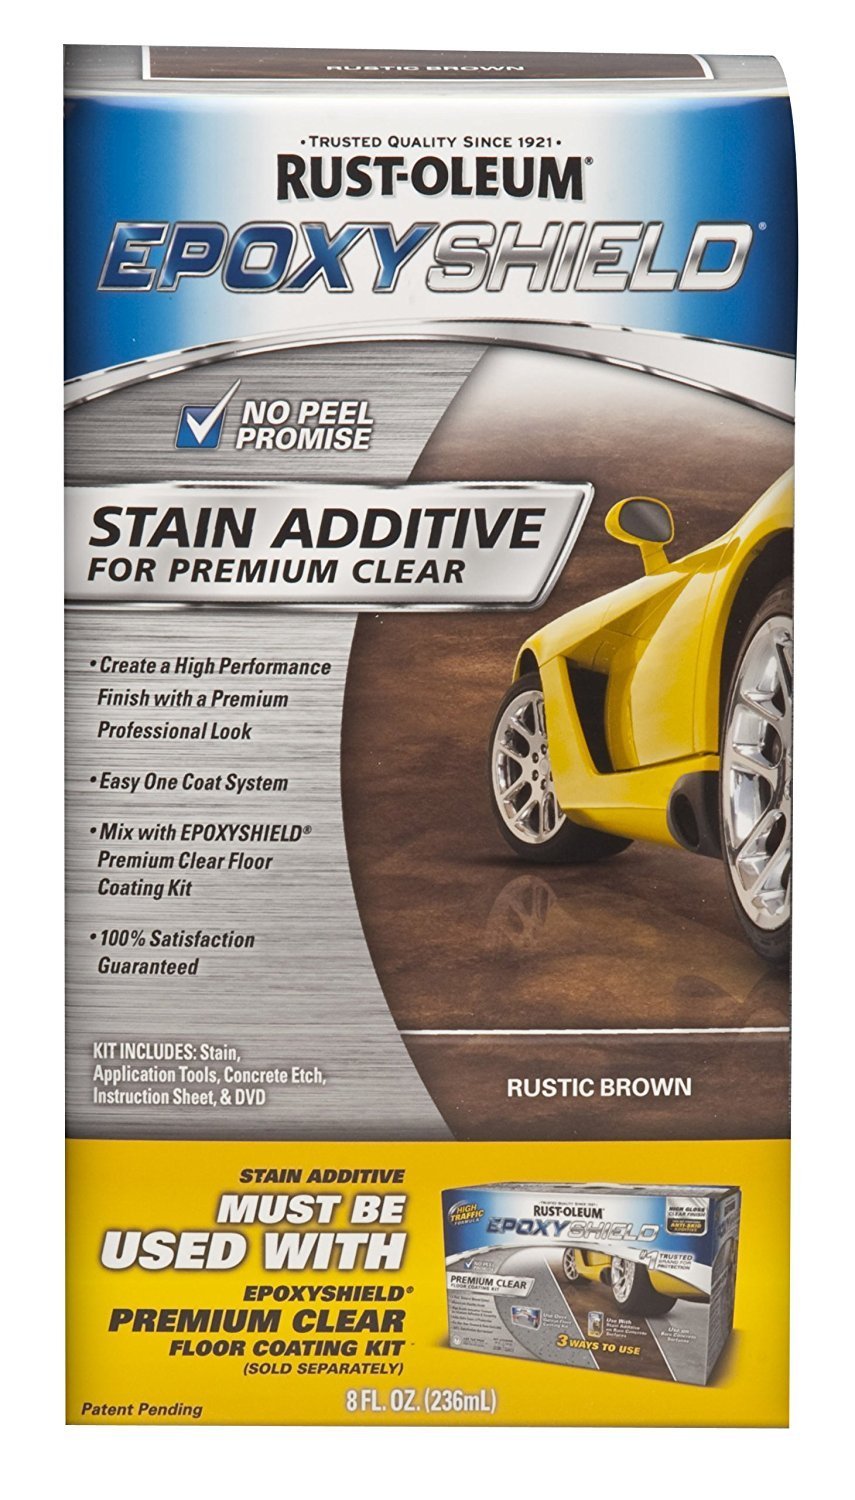 Rust-Oleum Epoxyshield Stain Additive for Premium Clear - Rustic Brown